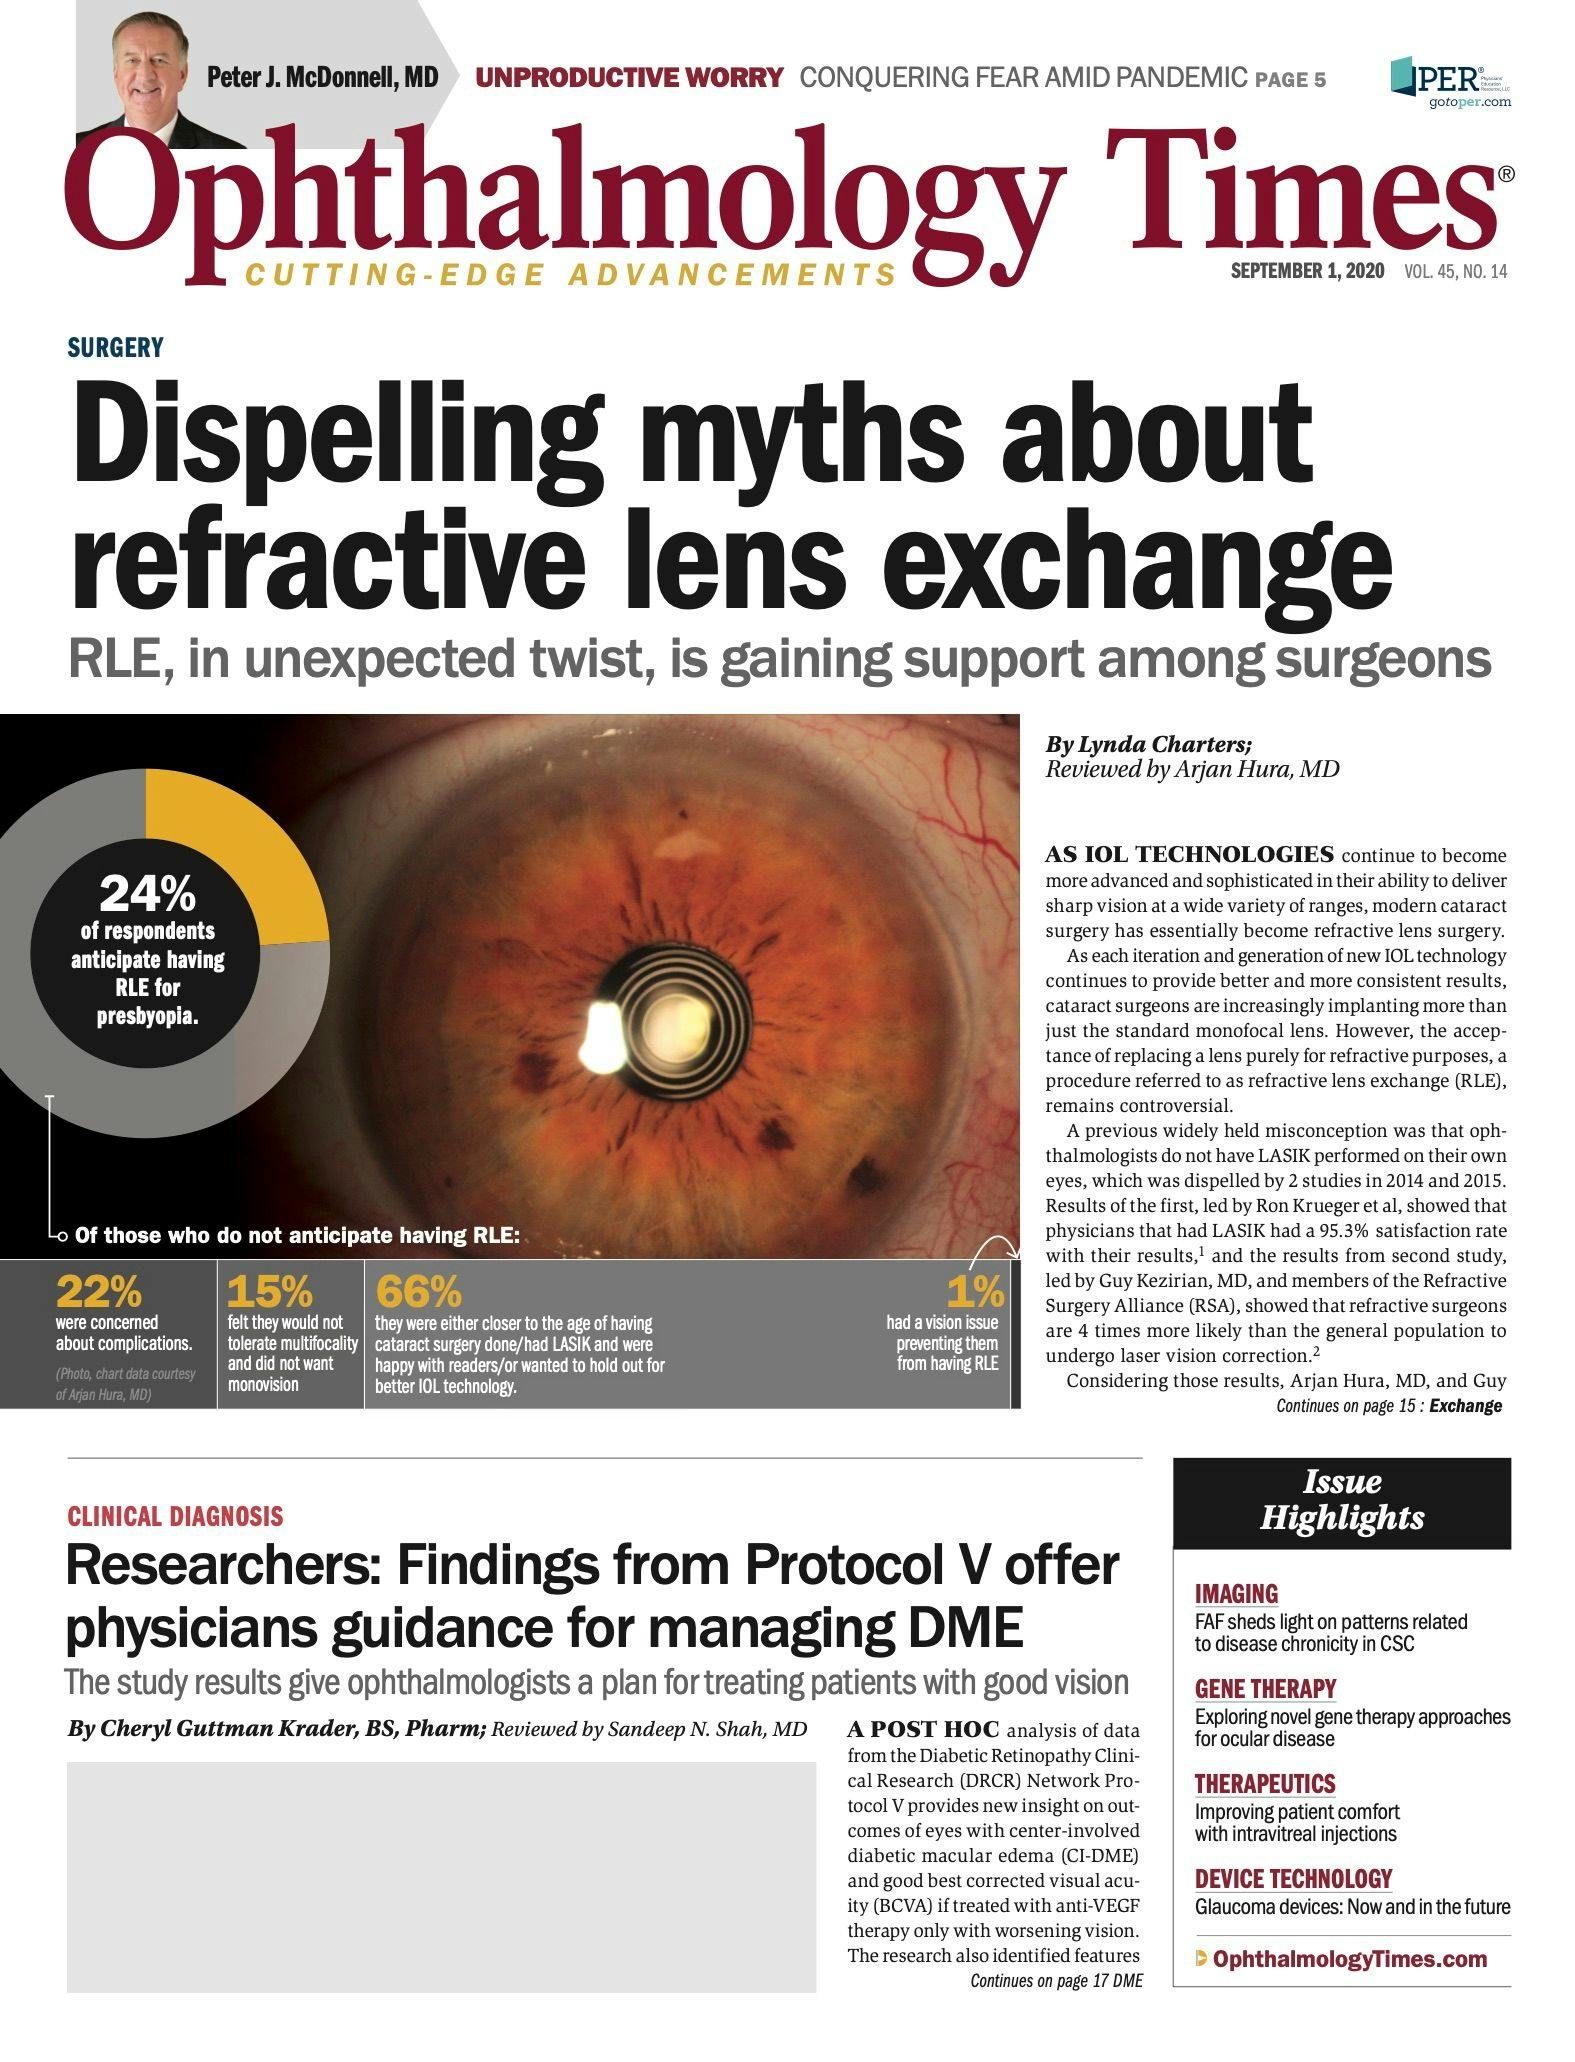 Ophthalmology Times: September 1, 2020